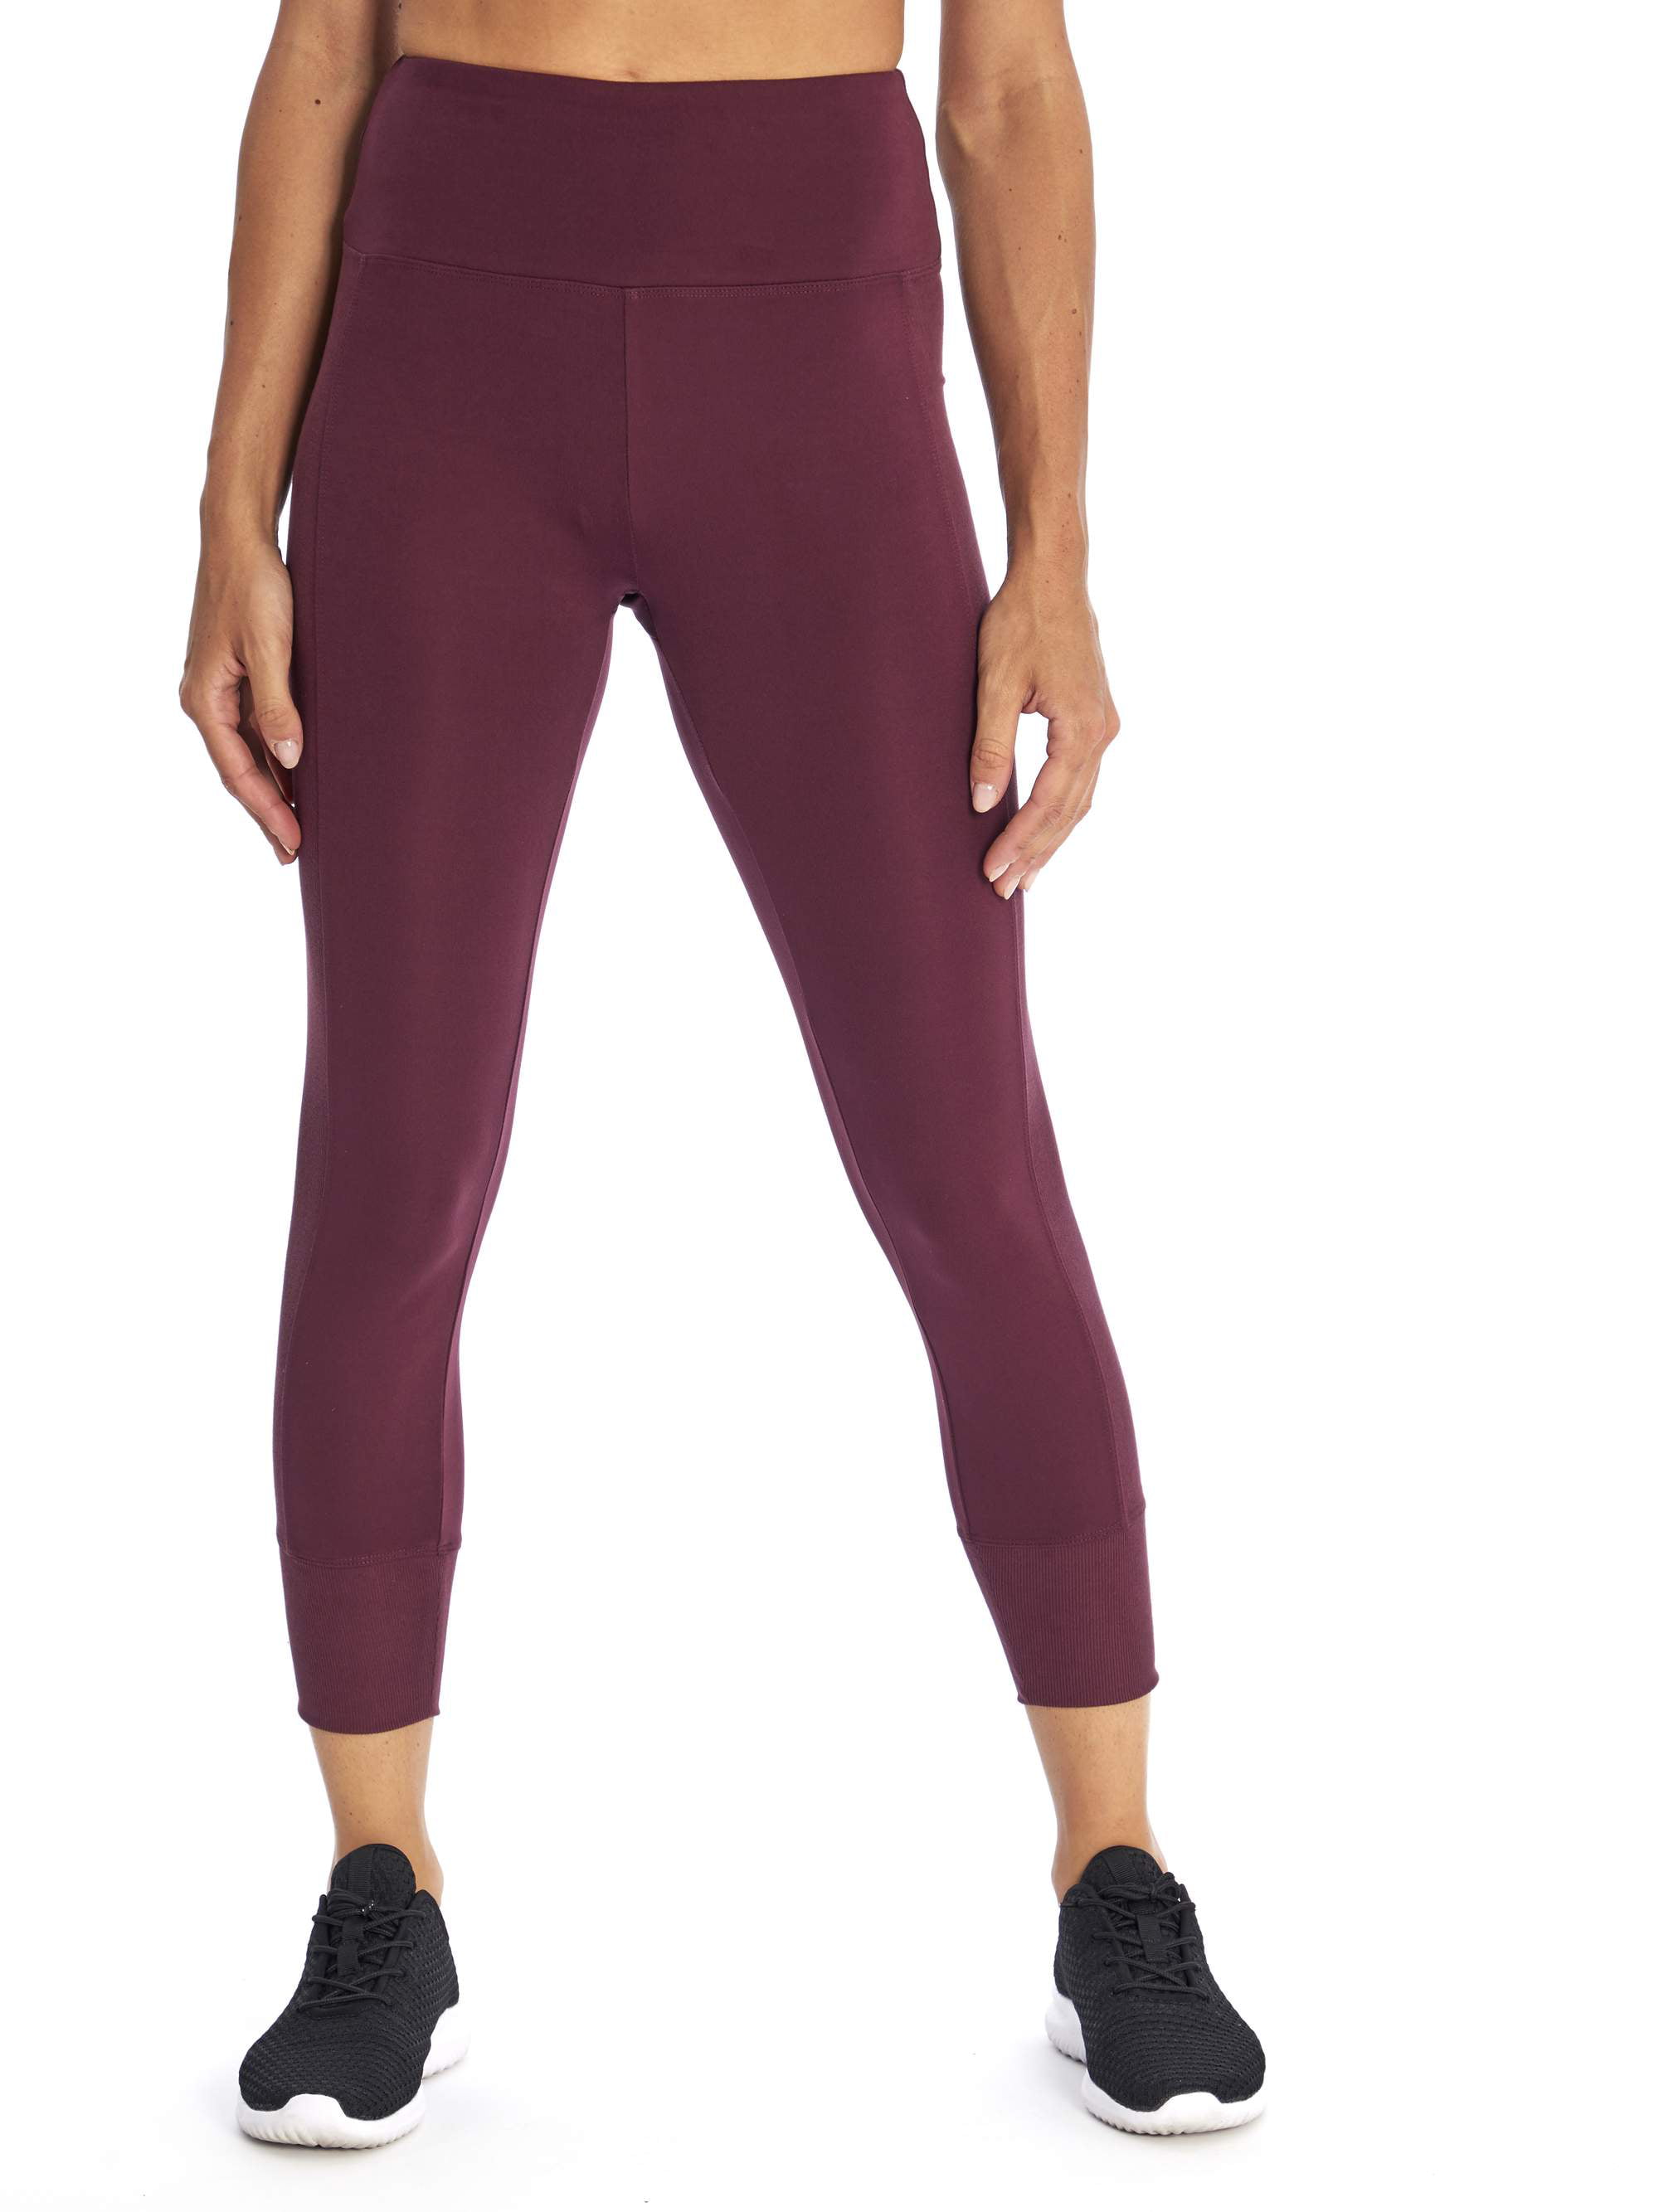 Buy BALLY TOTAL FITNESS High-rise Pocket Ankle Legging - Nocolor At 45% Off  | Editorialist